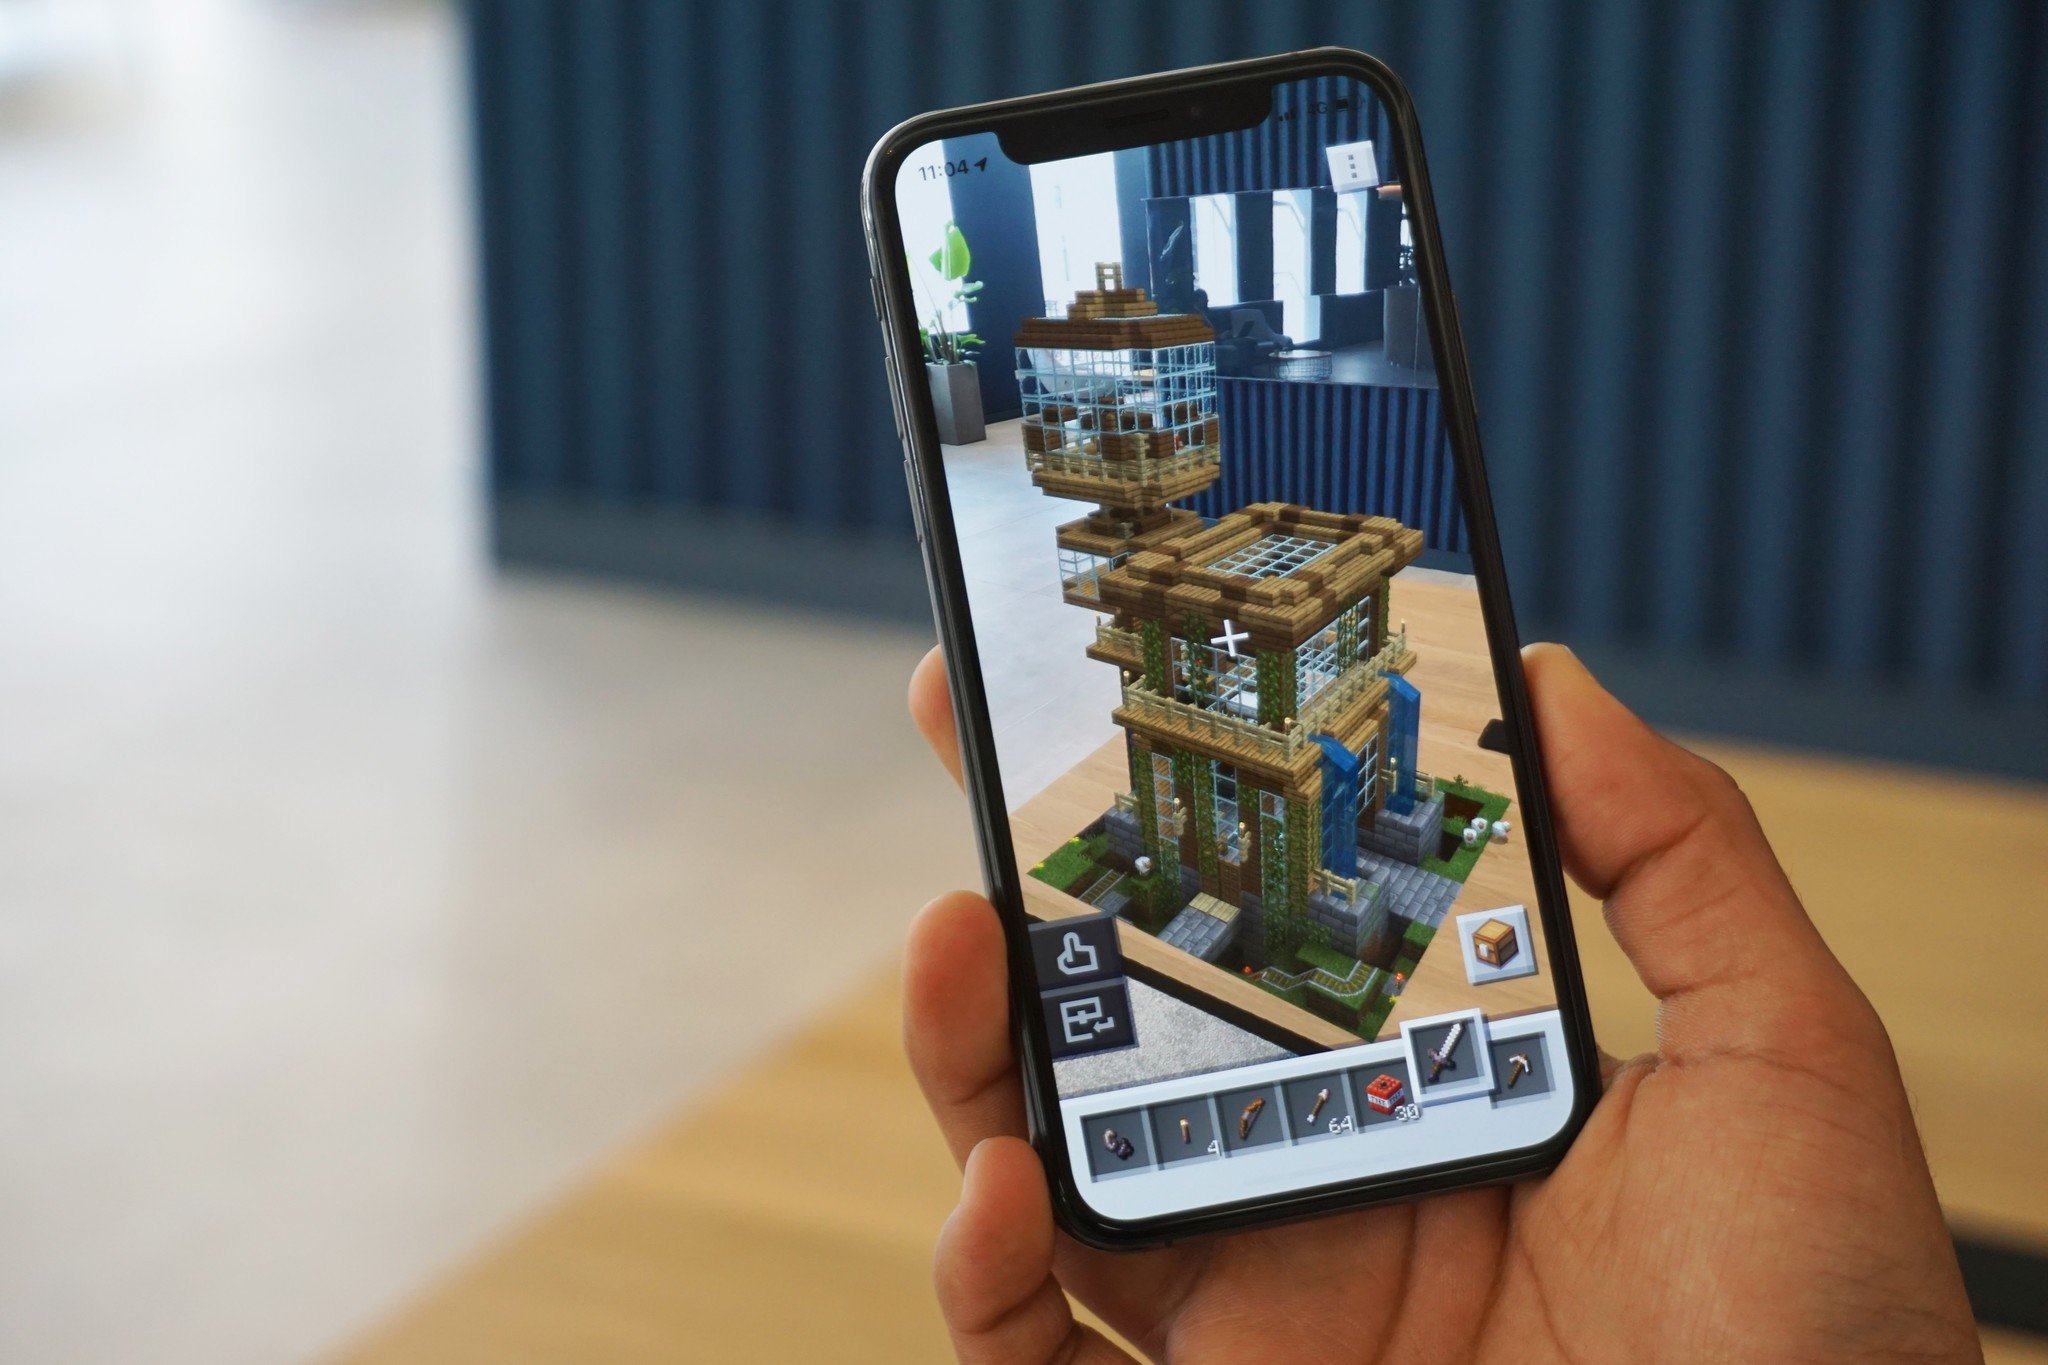 AR game Minecraft Earth to be shut down in June - CNET